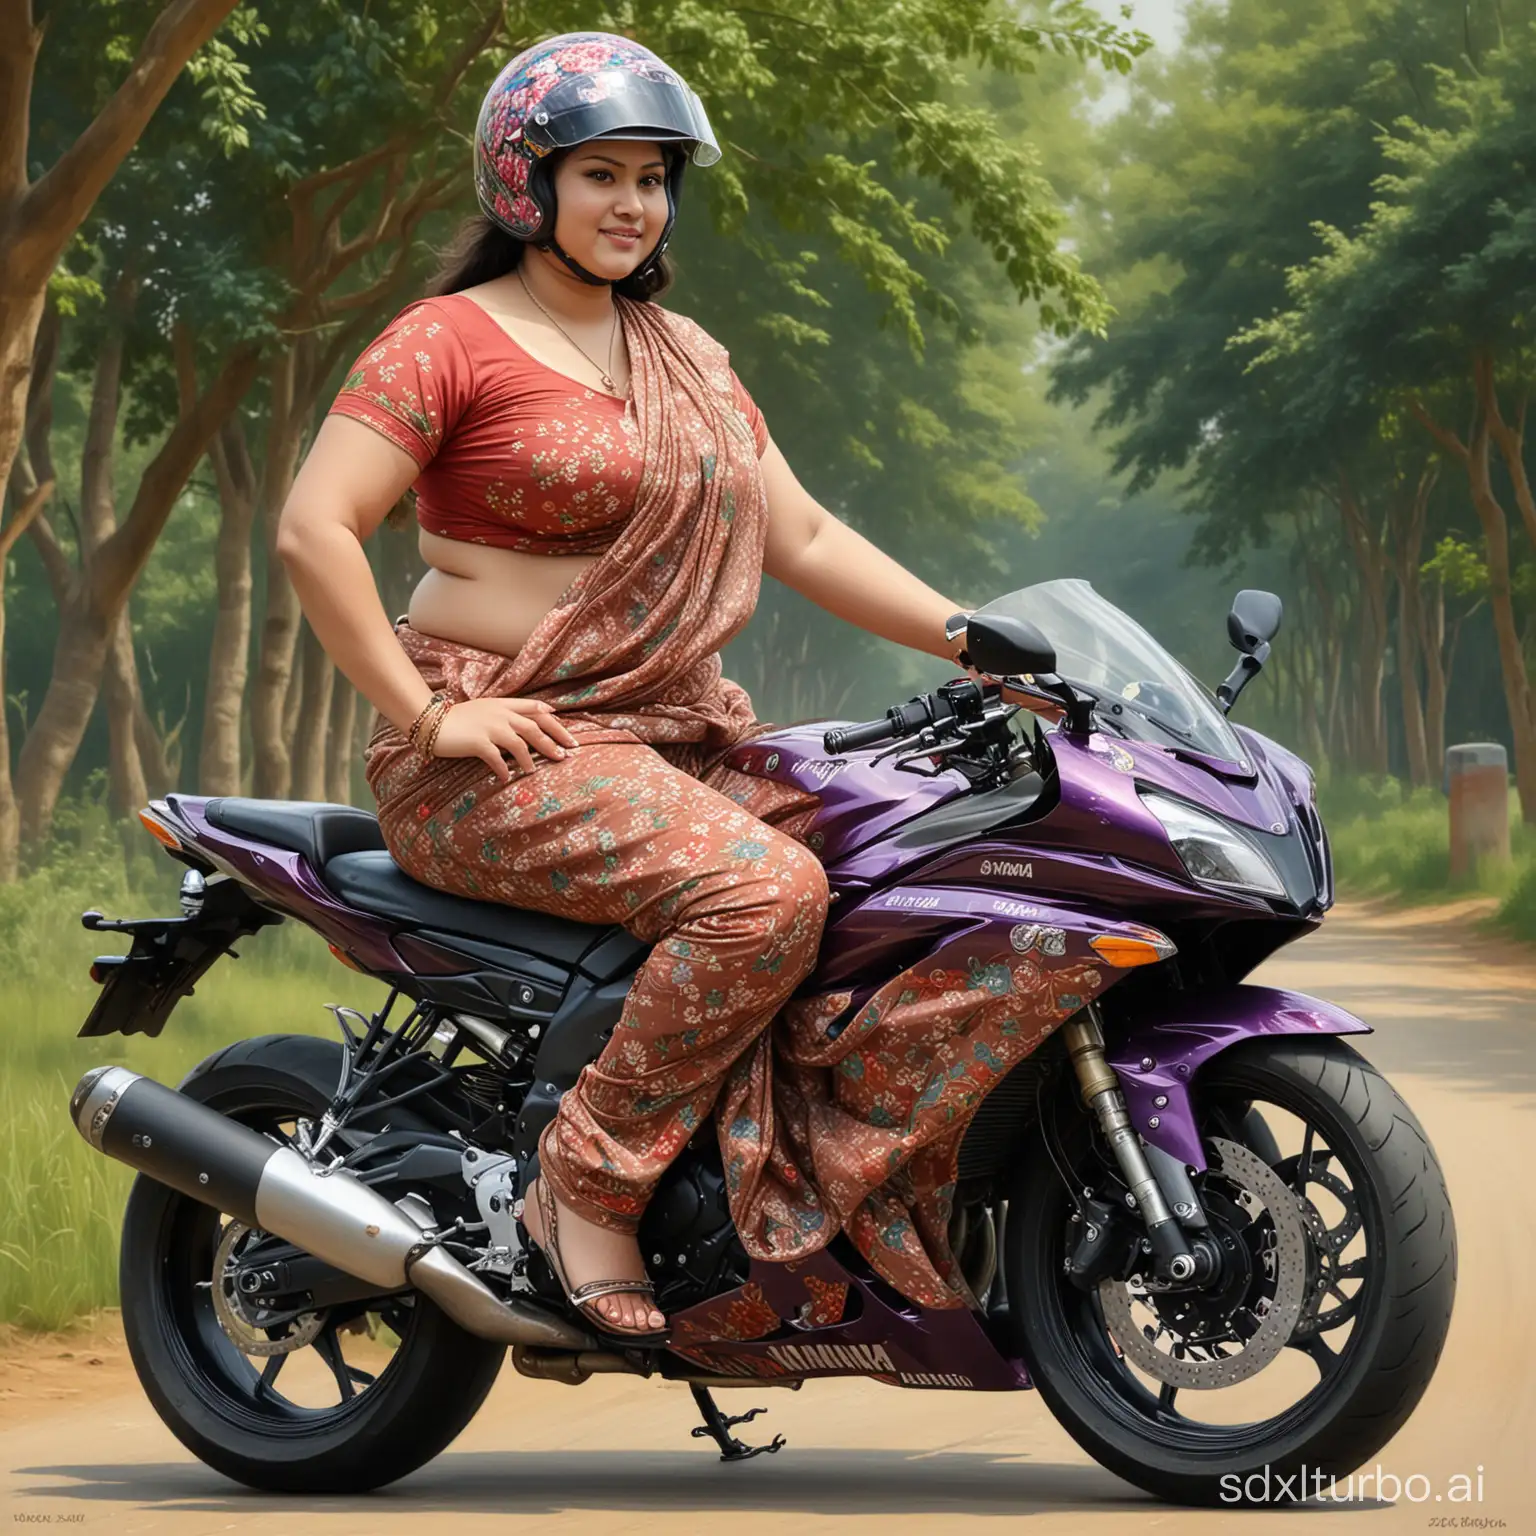 A beautiful fat lady , helmet, wearing a traditional Floral  Saree, bare midriff, riding on Yamaha R15 sportsbike, 2010 style realistic painting